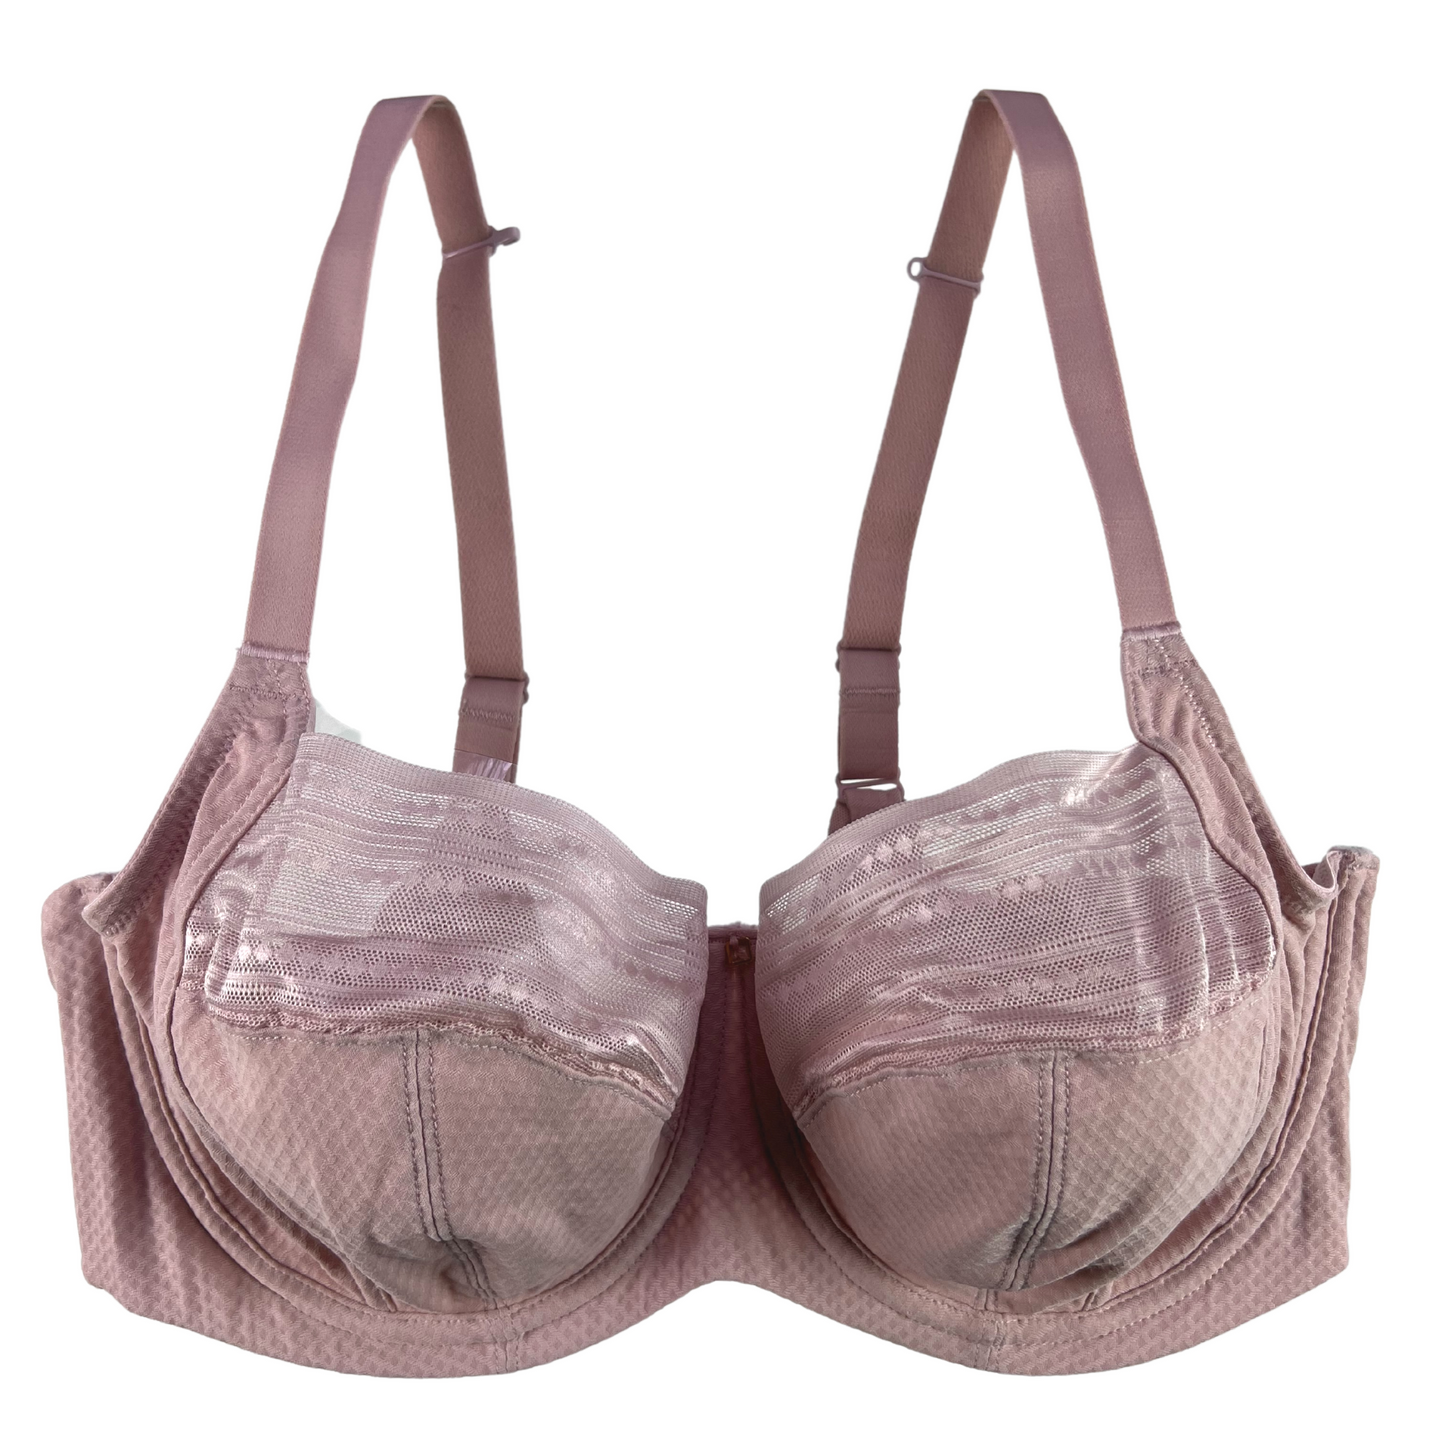 Panache Women's Serene Underwired Full Cup Bra, Vintage, 34H : :  Clothing, Shoes & Accessories